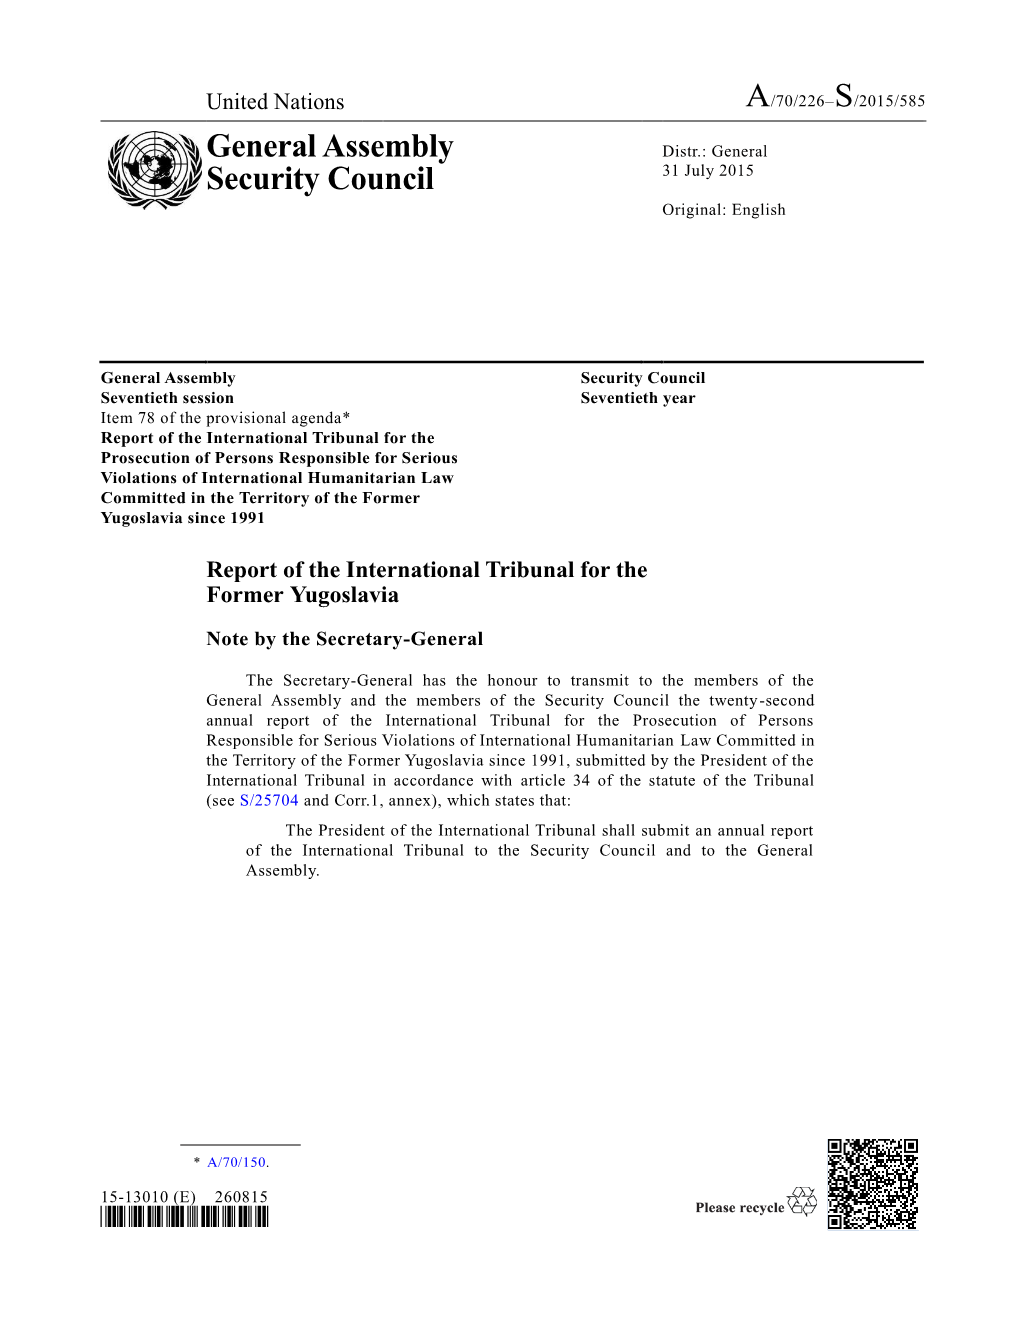 A/70/226–S/2015/585 General Assembly Security Council